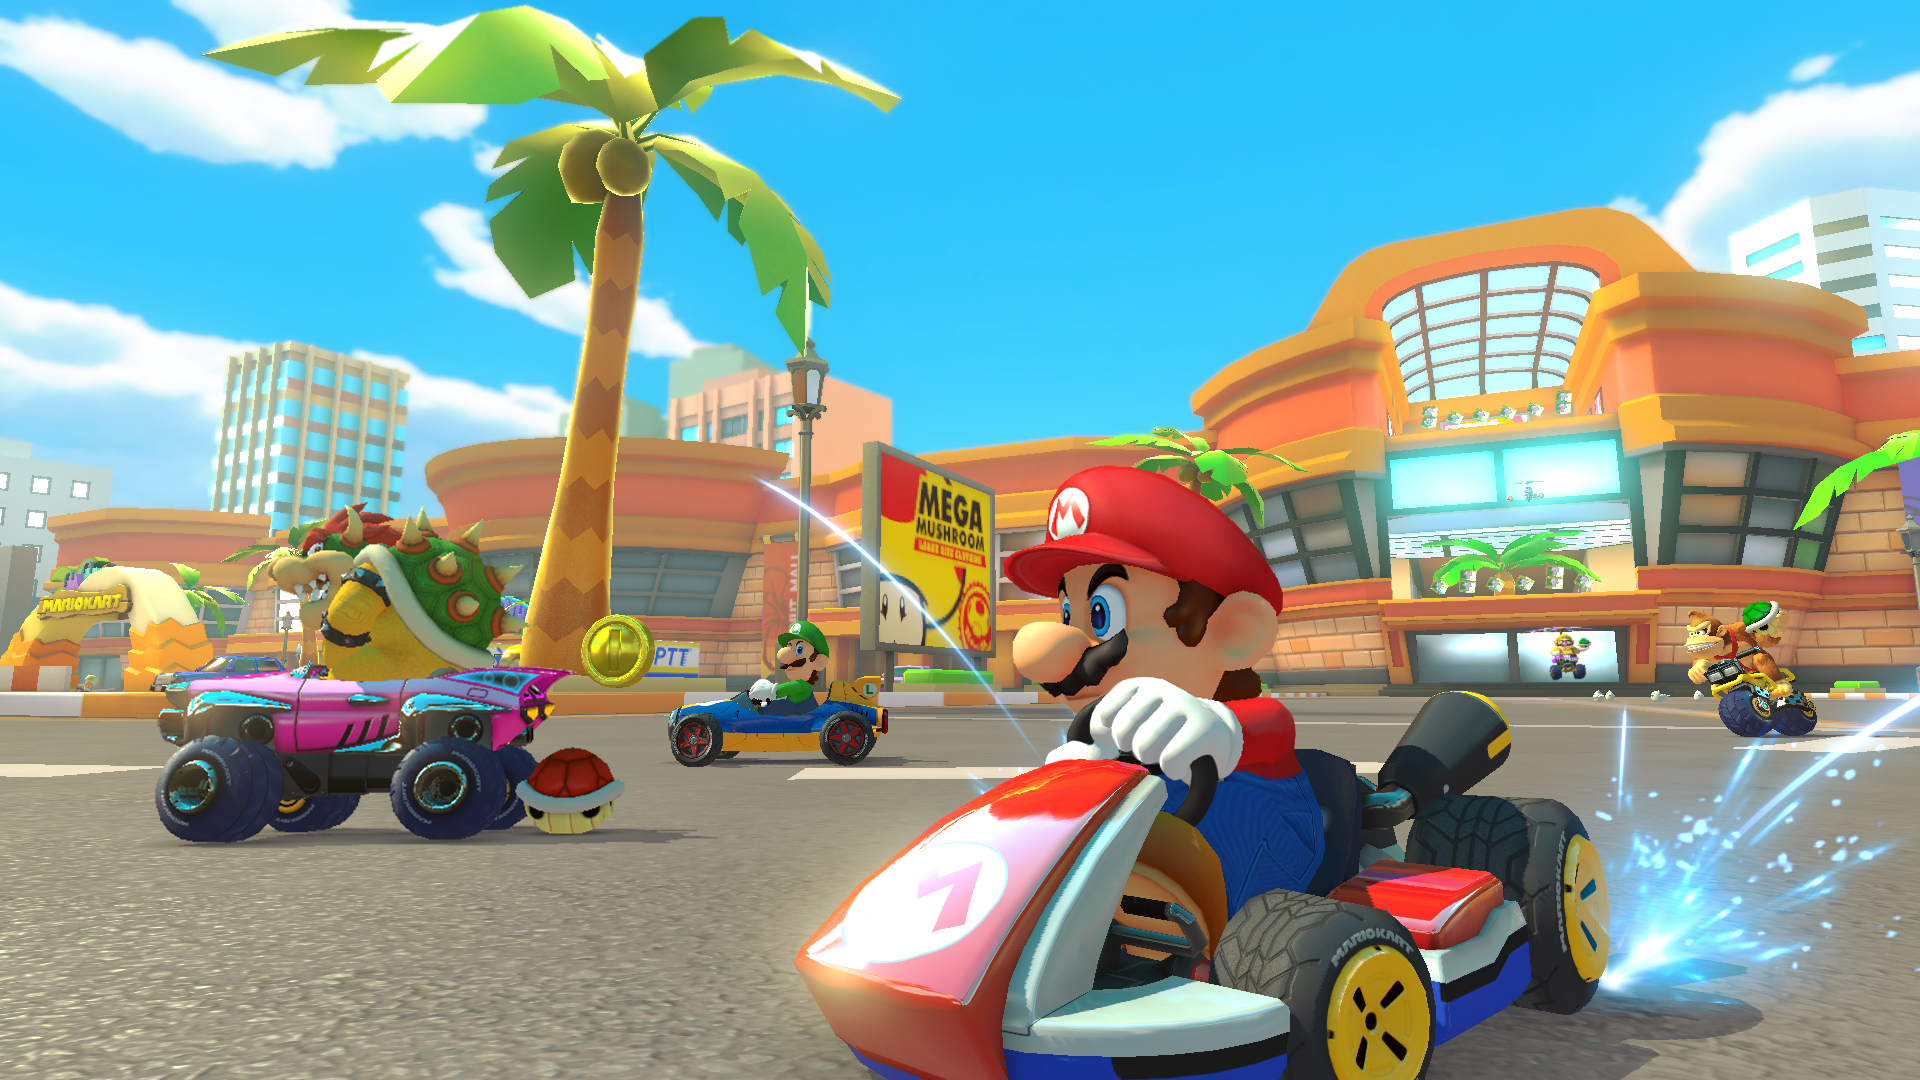 The complete history of Mario Kart